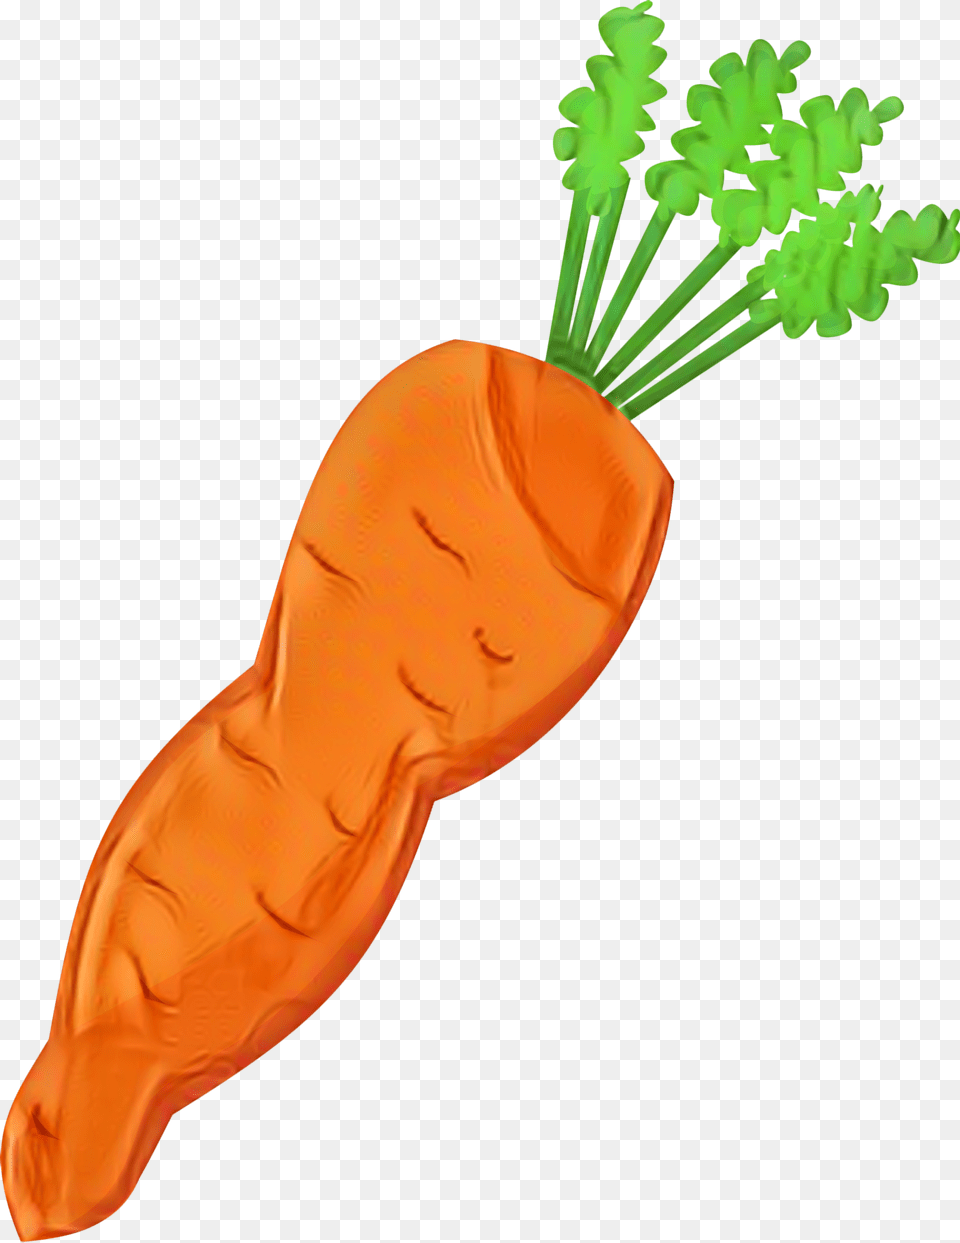 Baby Carrot Clip Art Vegetable Carrot Salad Clip Art Carrot, Food, Plant, Produce, Adult Free Png